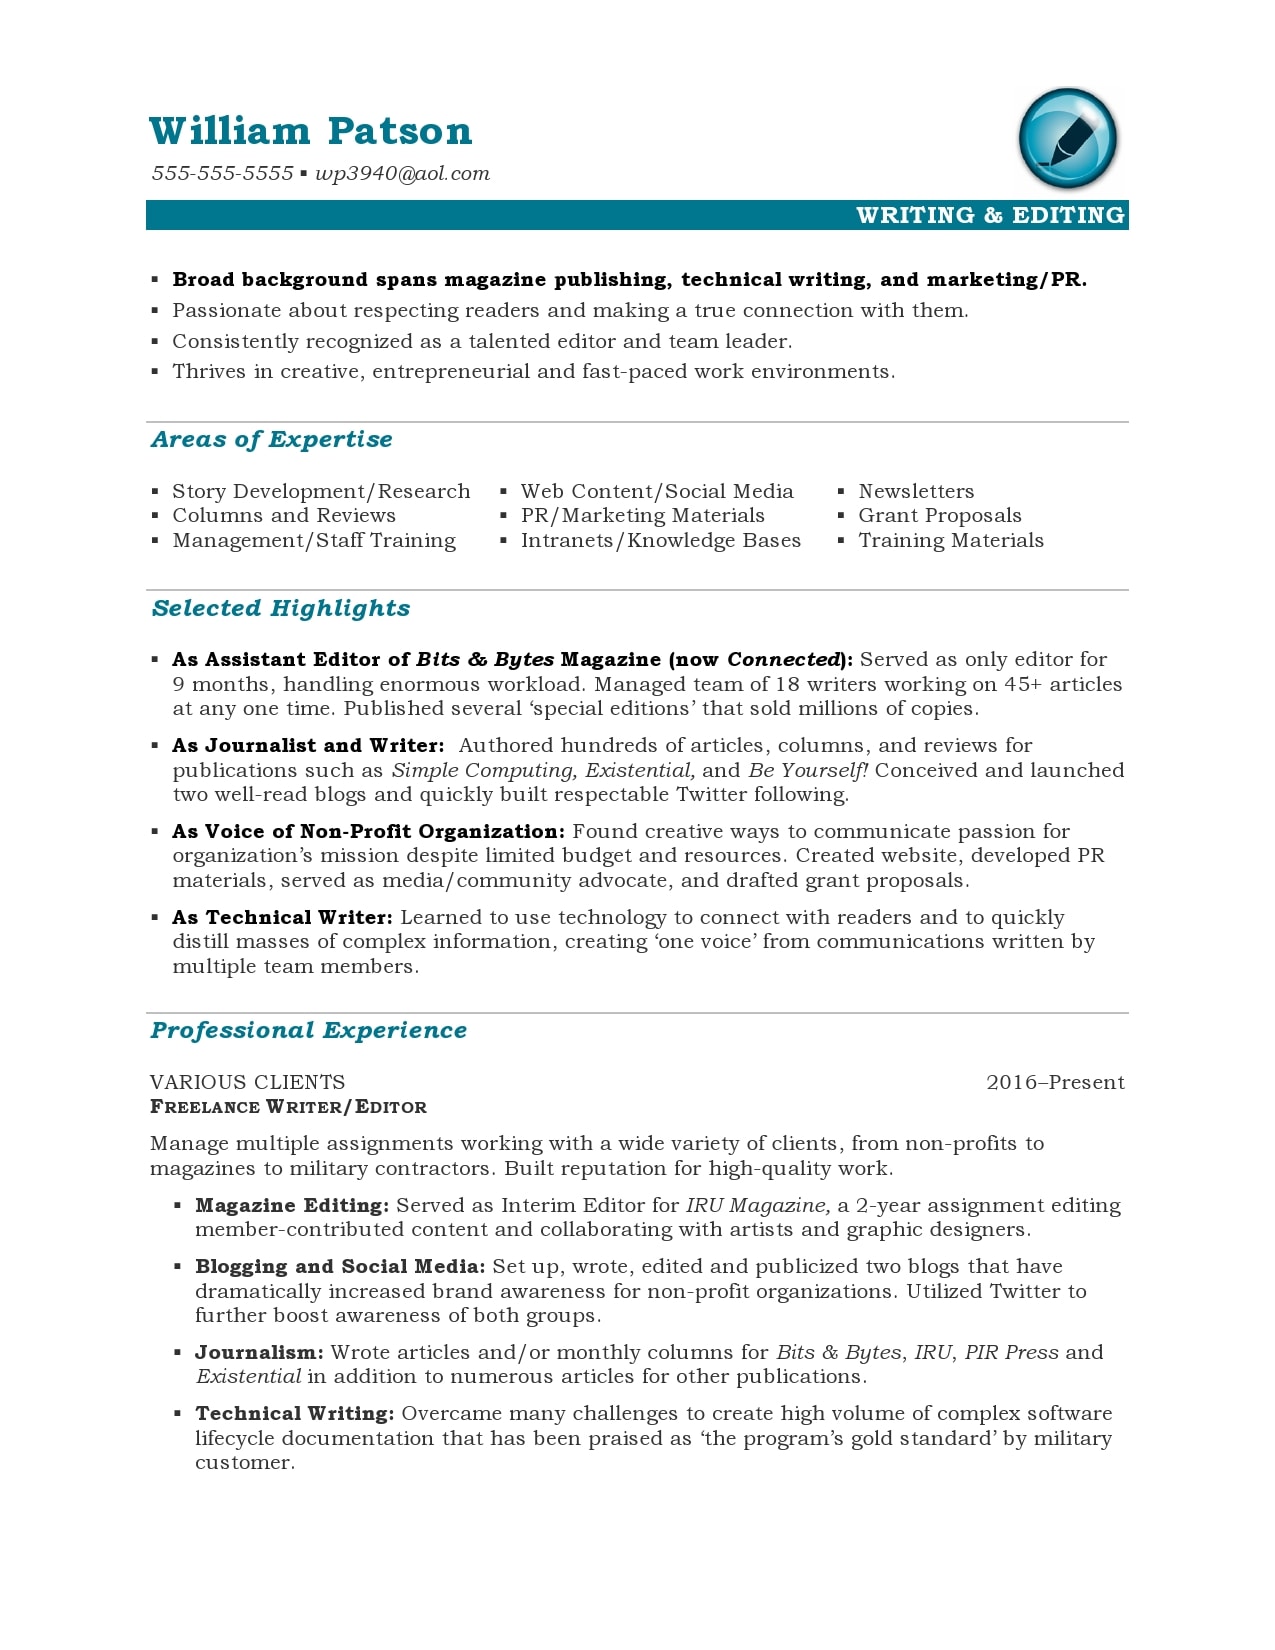 Writing a Professional Resume